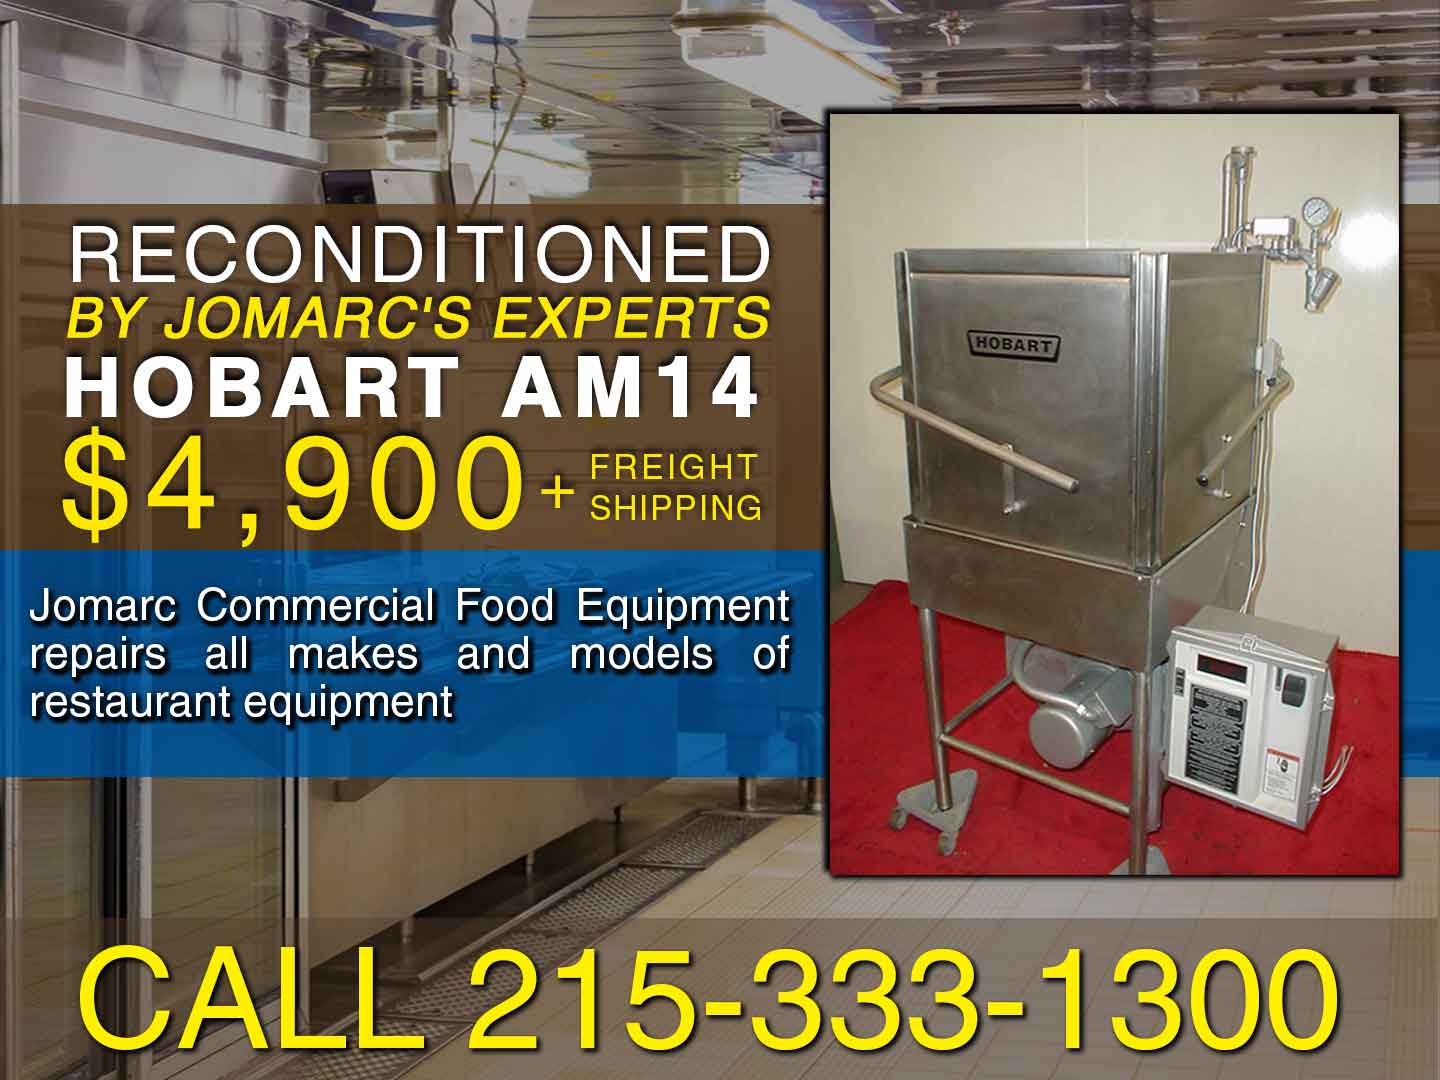 Commercial Food Equipment Repair South Philadelphia Hobart Dough Mixer Repair Pizza Oven Dishwashers Ovens Fryers Slicers Steamers